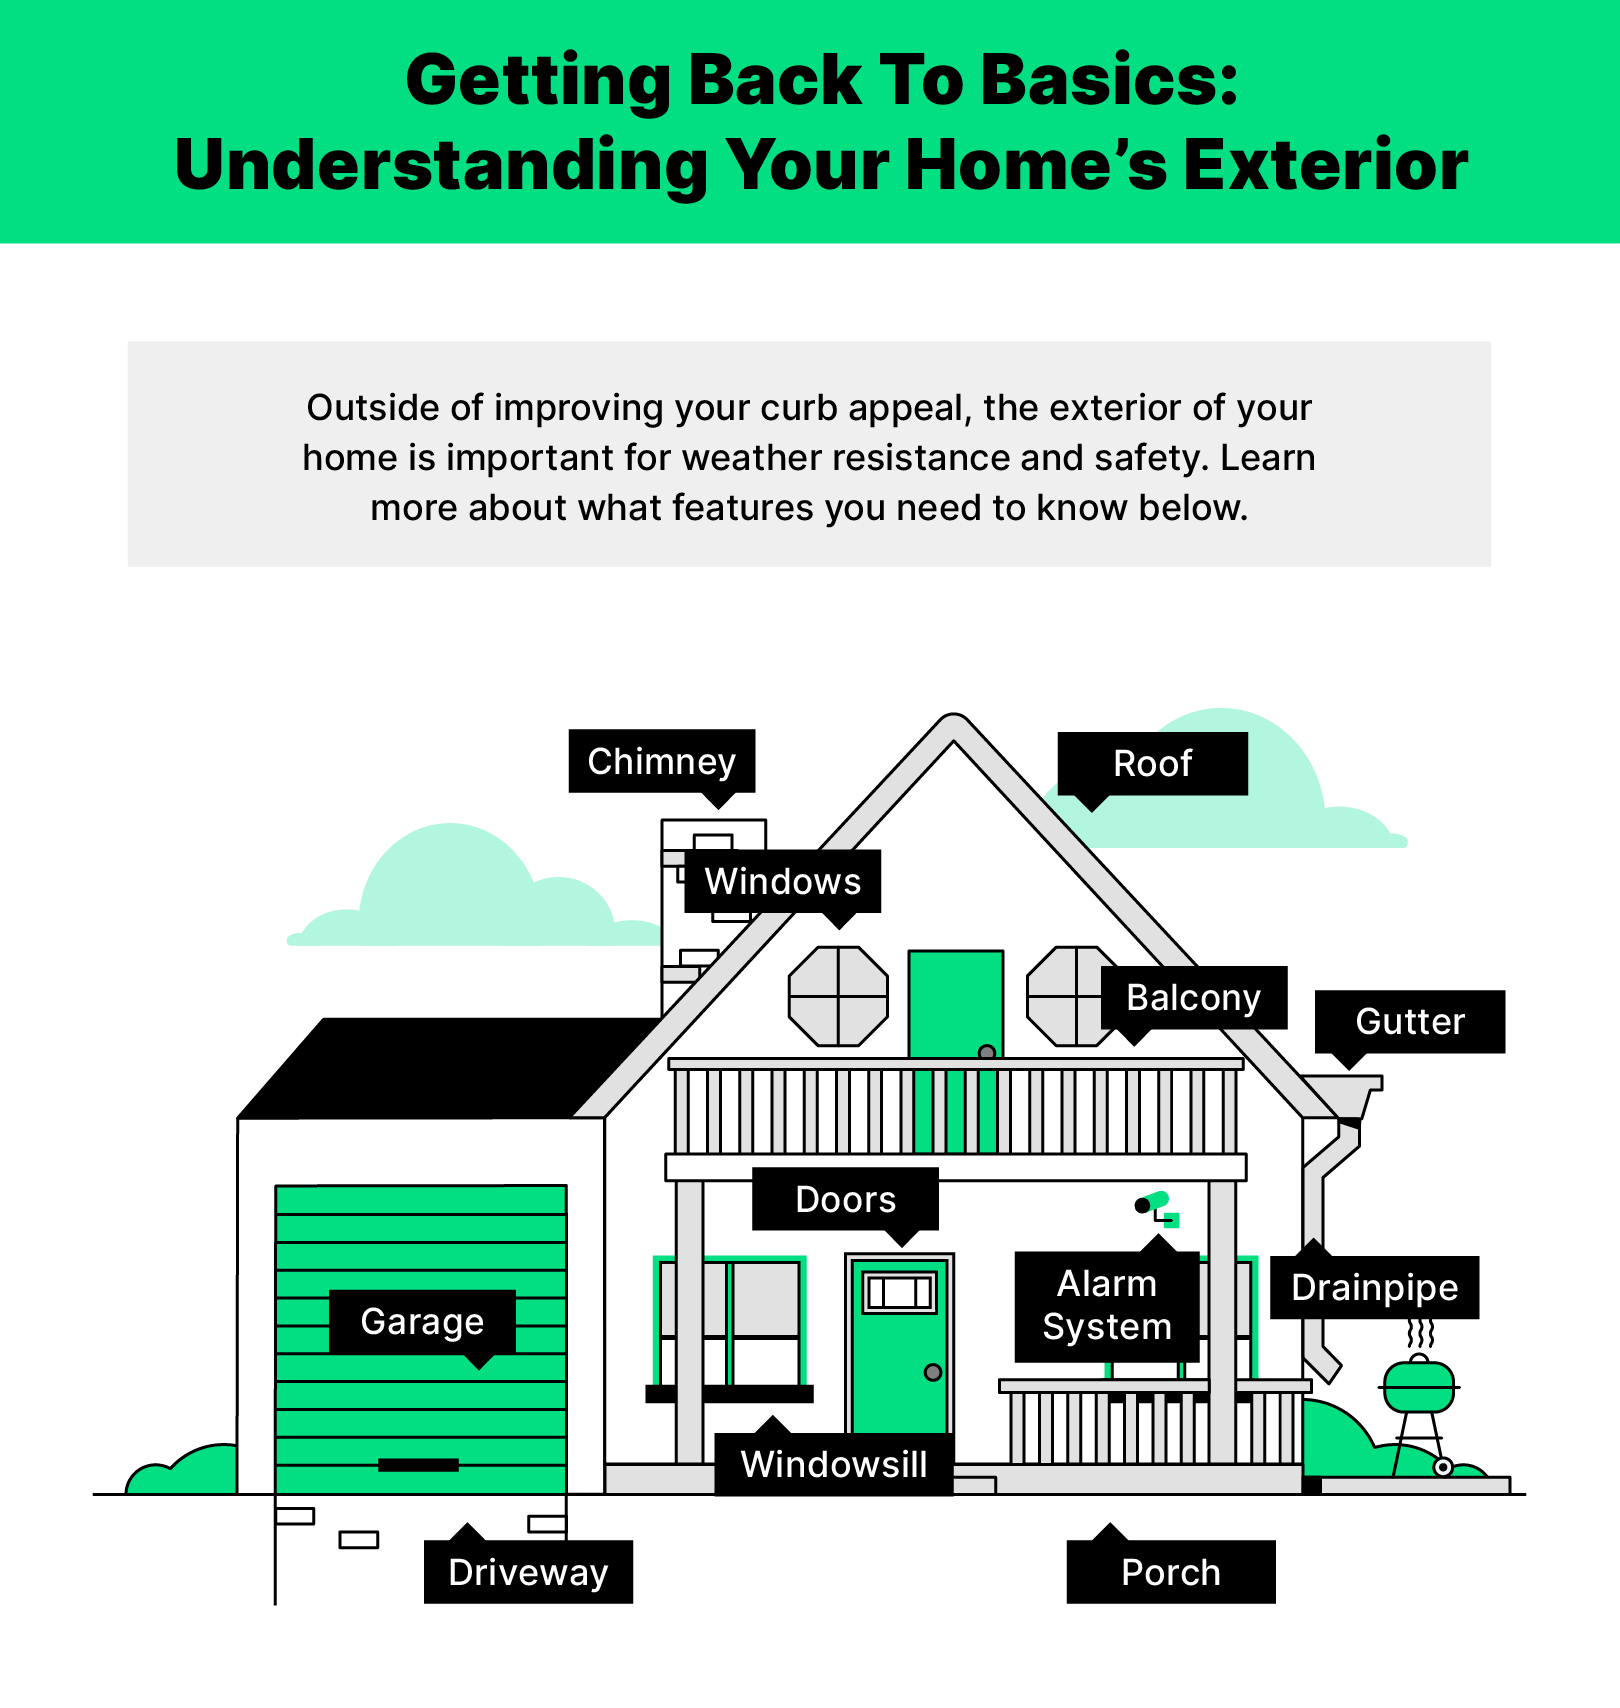 Illustration of the exterior of a home with different parts called out